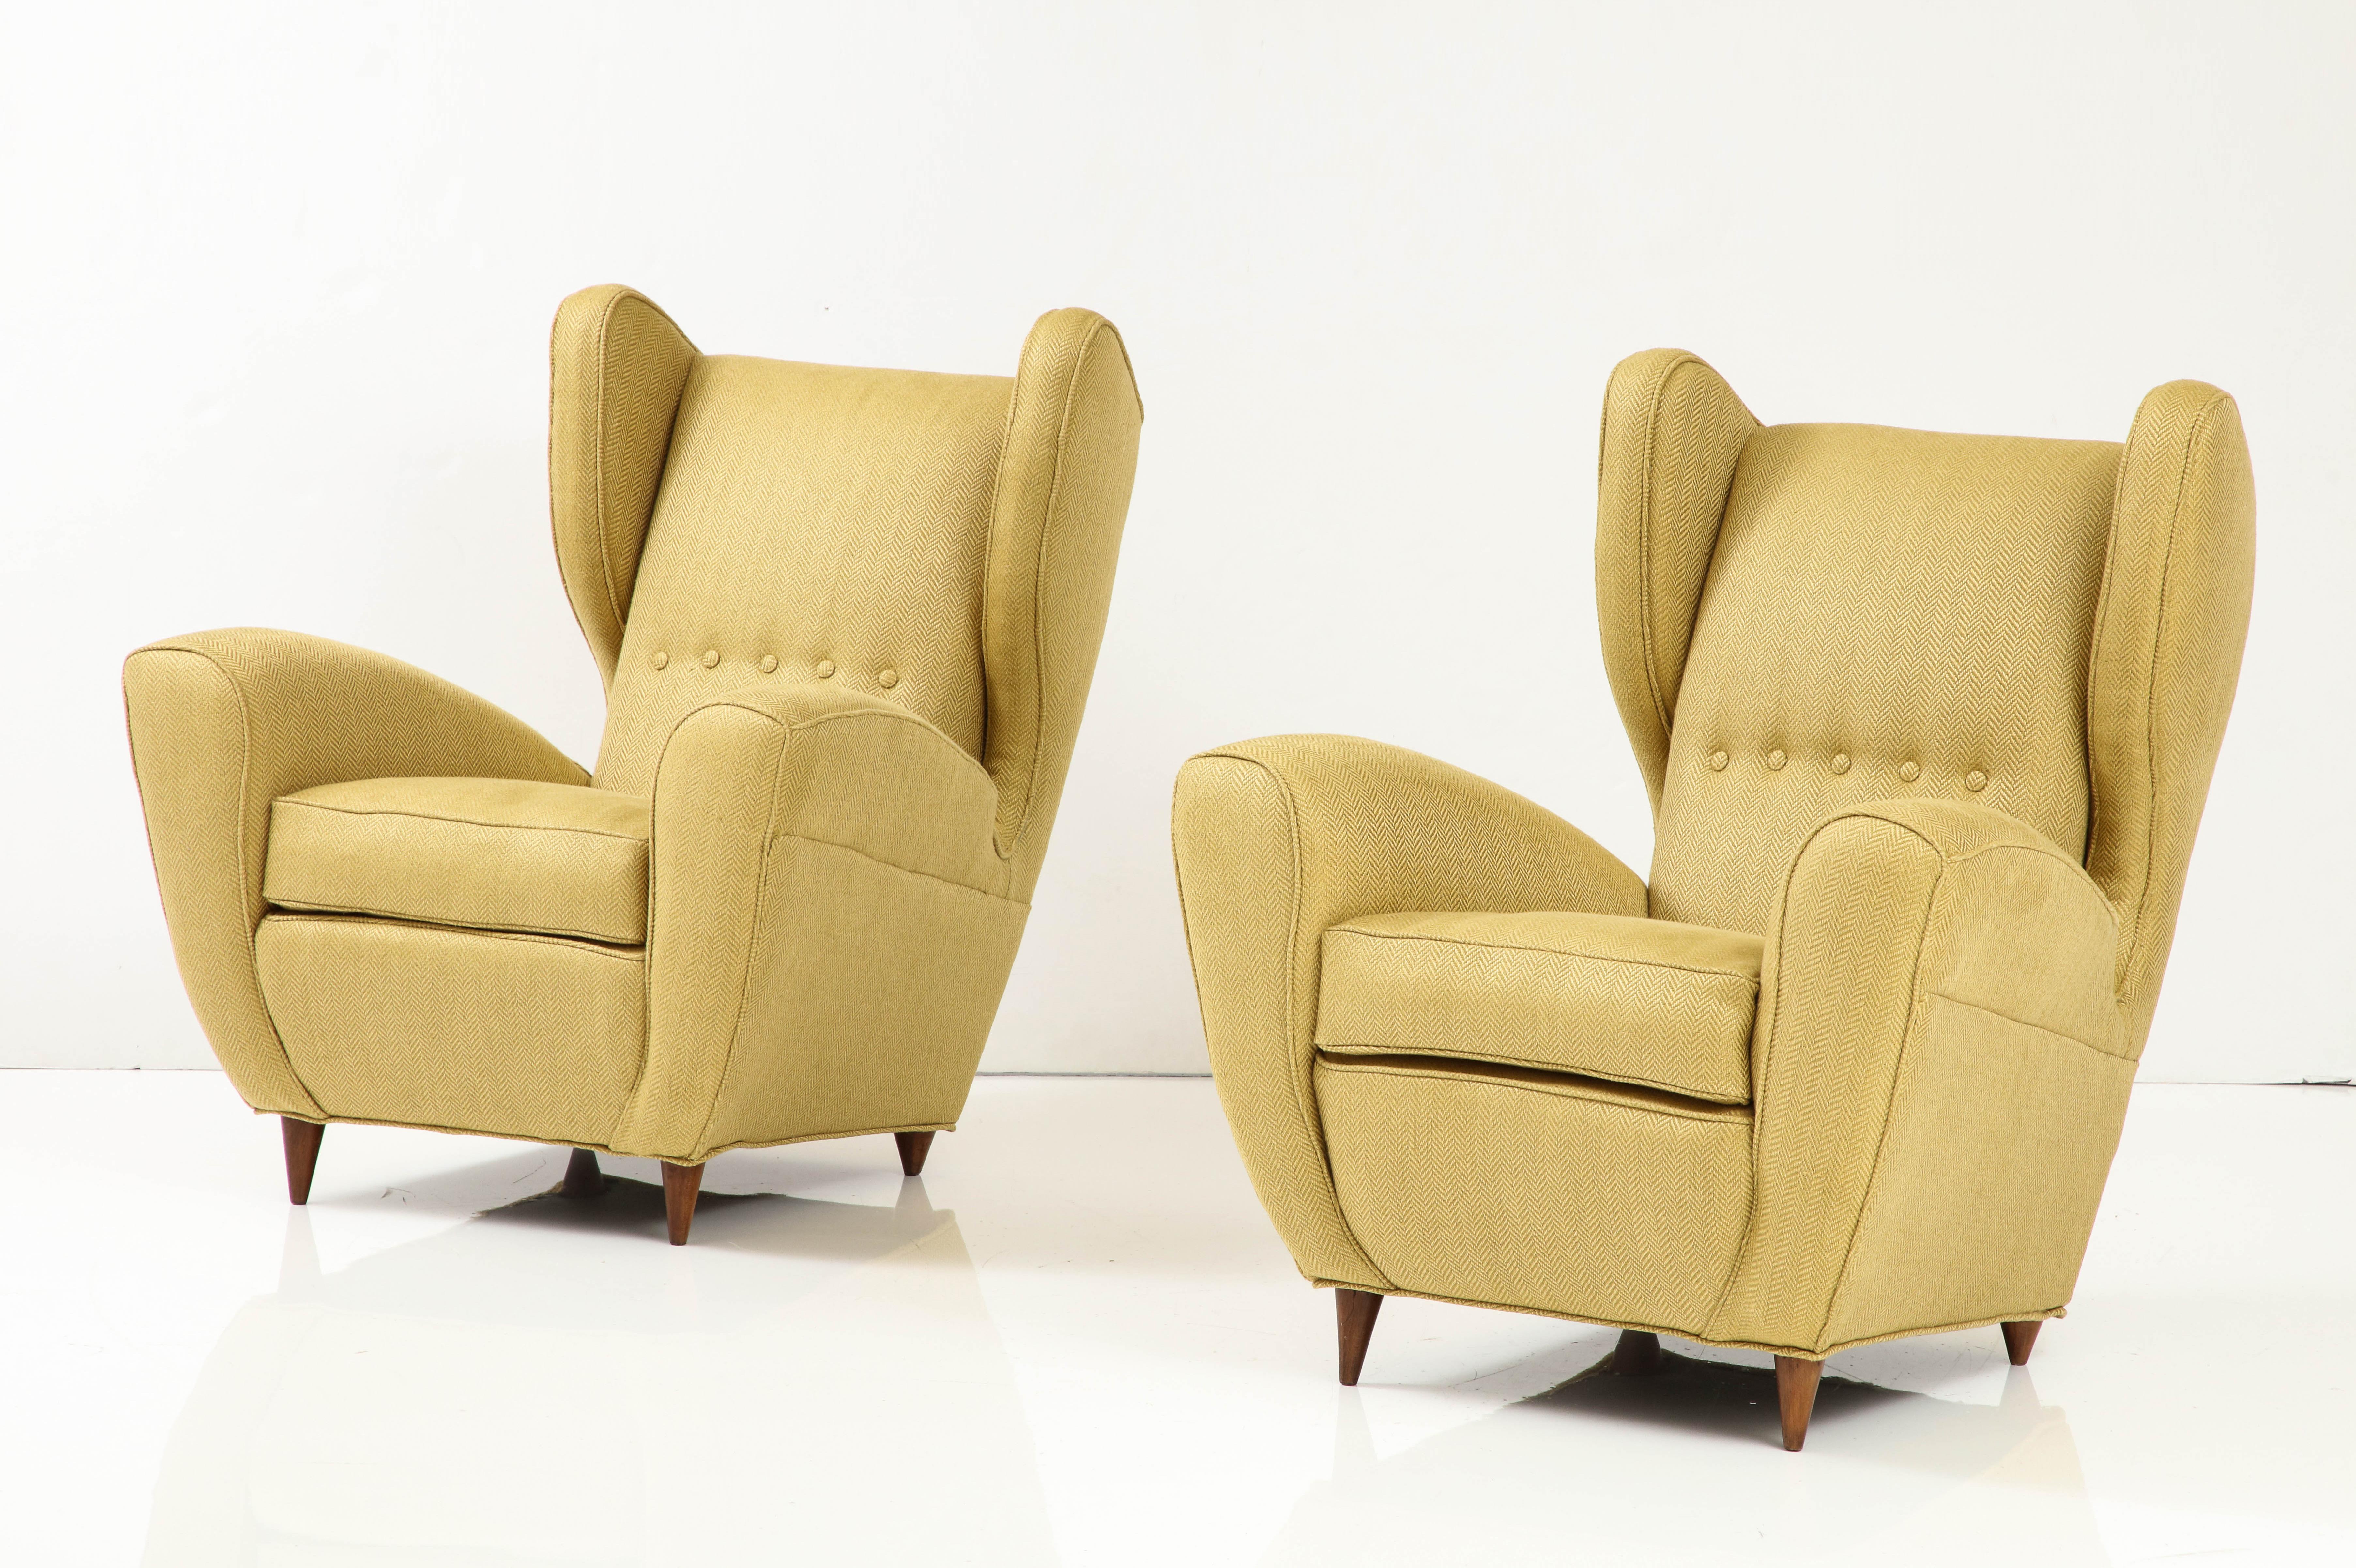 Melchiorre Bega Wingback Lounge Chairs Italien 1950er Jahre im Zustand „Gut“ im Angebot in New York, NY